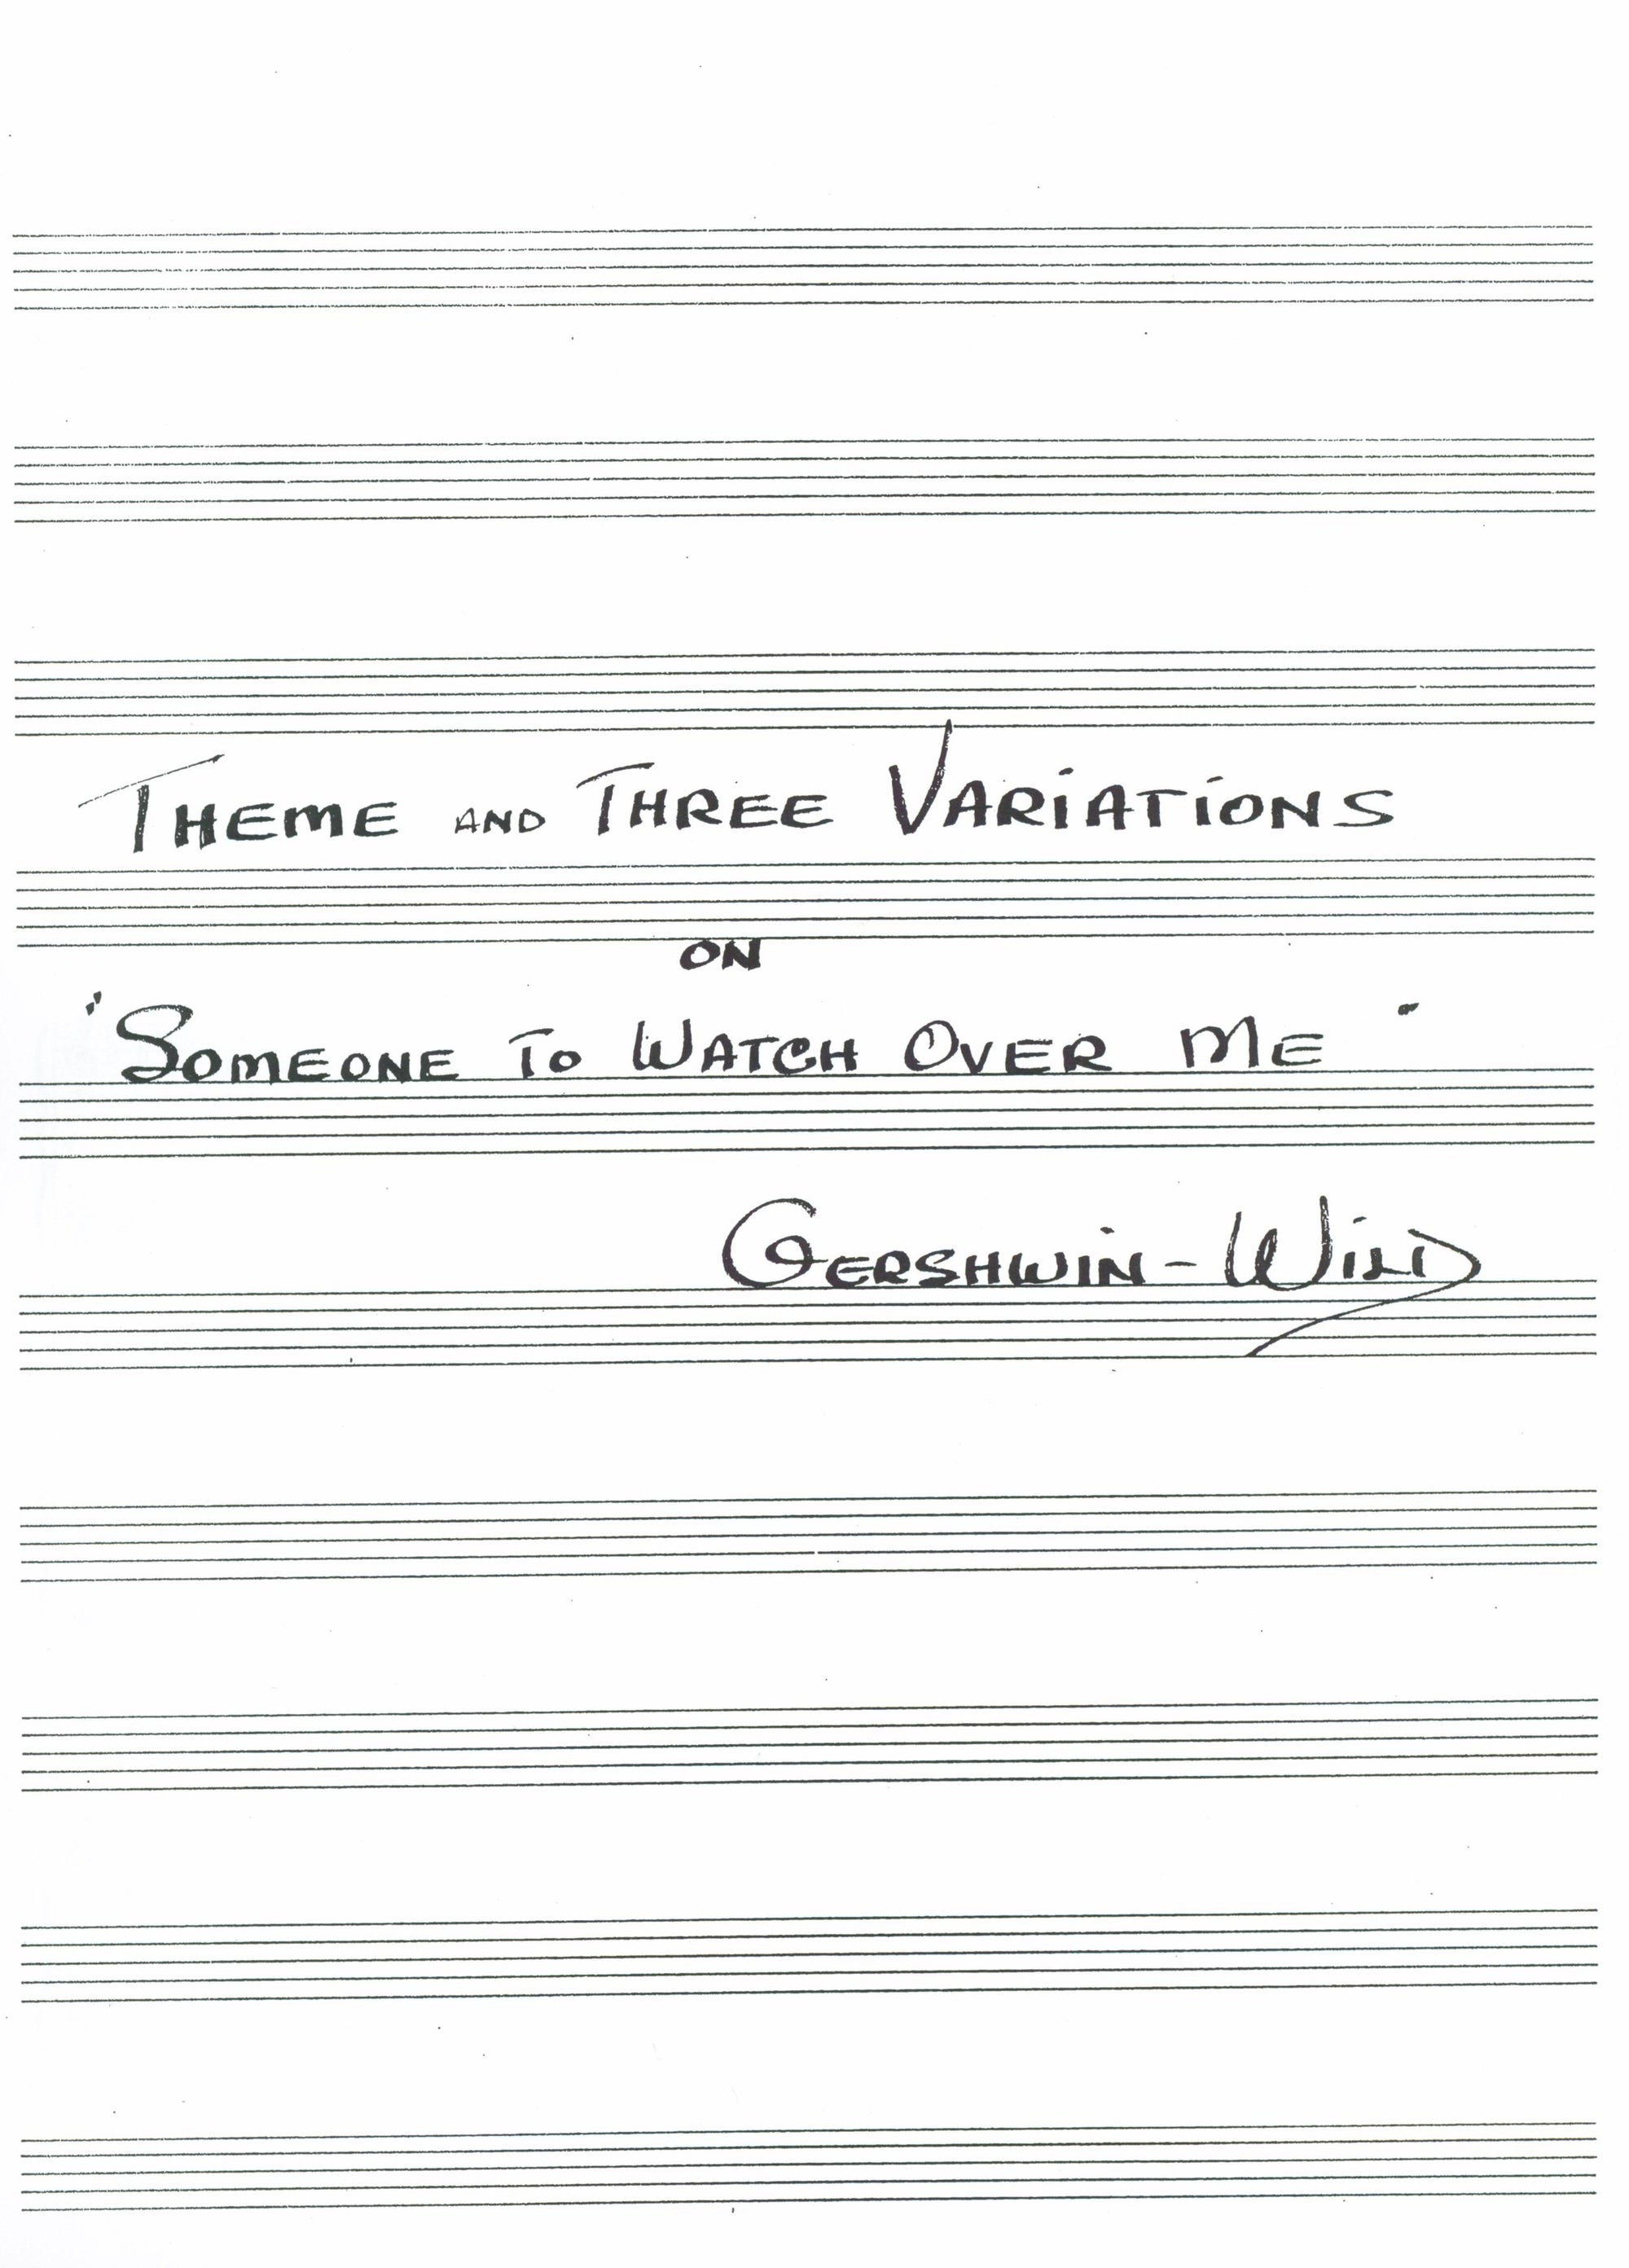 Wild: Theme and 3 Variations on Gershwin's "Someone to Watch Over Me"